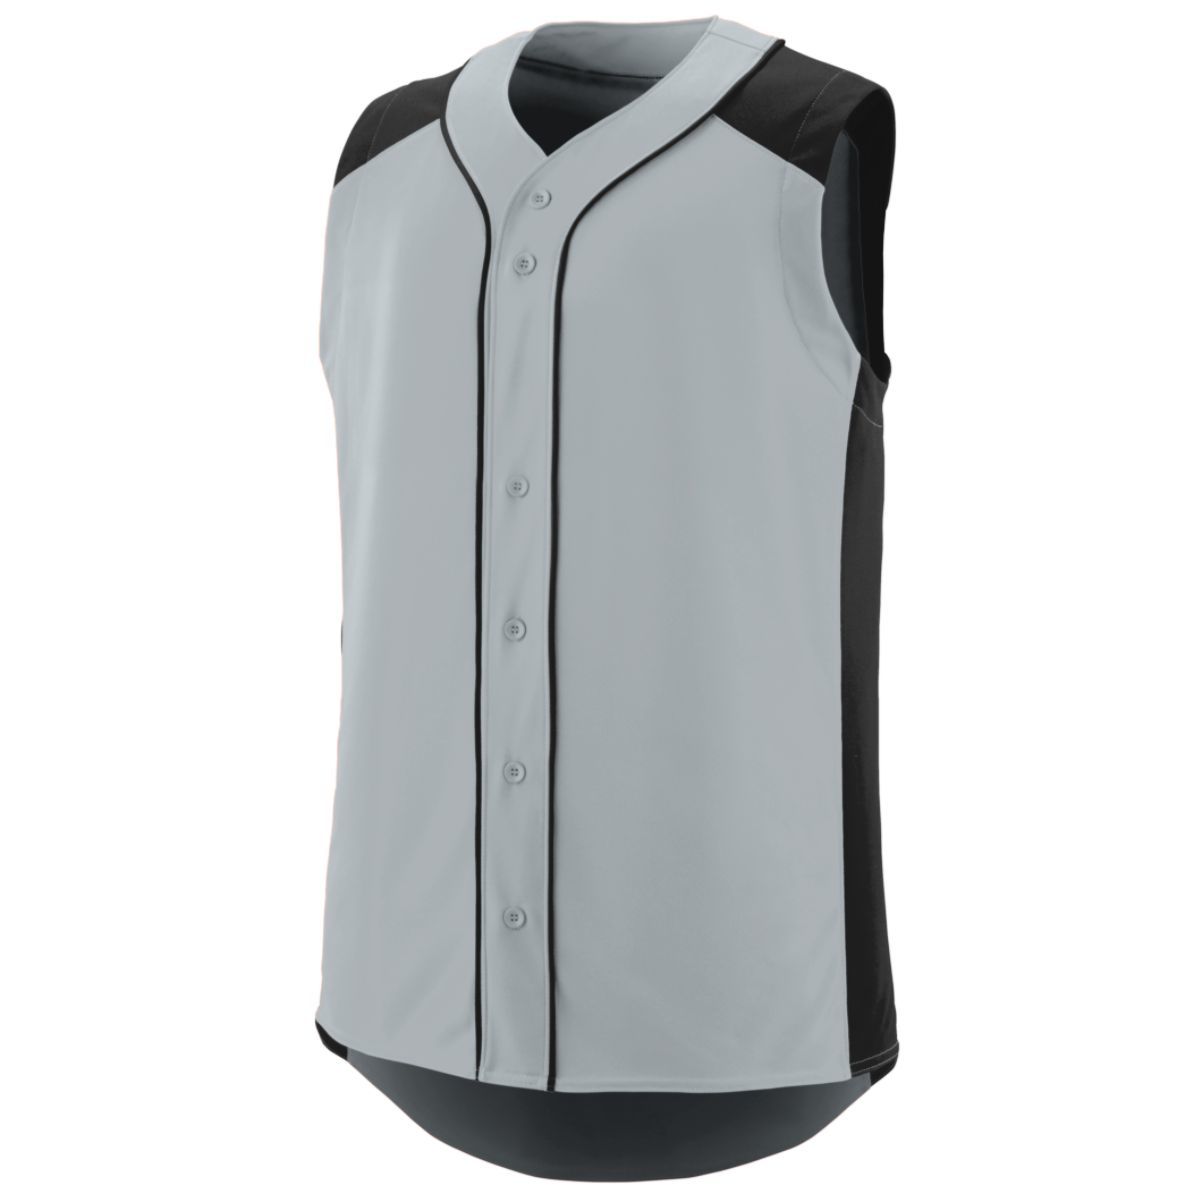 Augusta Sportswear Sleeveless Slugger Jersey in Silver/Black  -Part of the Adult, Adult-Jersey, Augusta-Products, Baseball, Shirts, All-Sports, All-Sports-1 product lines at KanaleyCreations.com